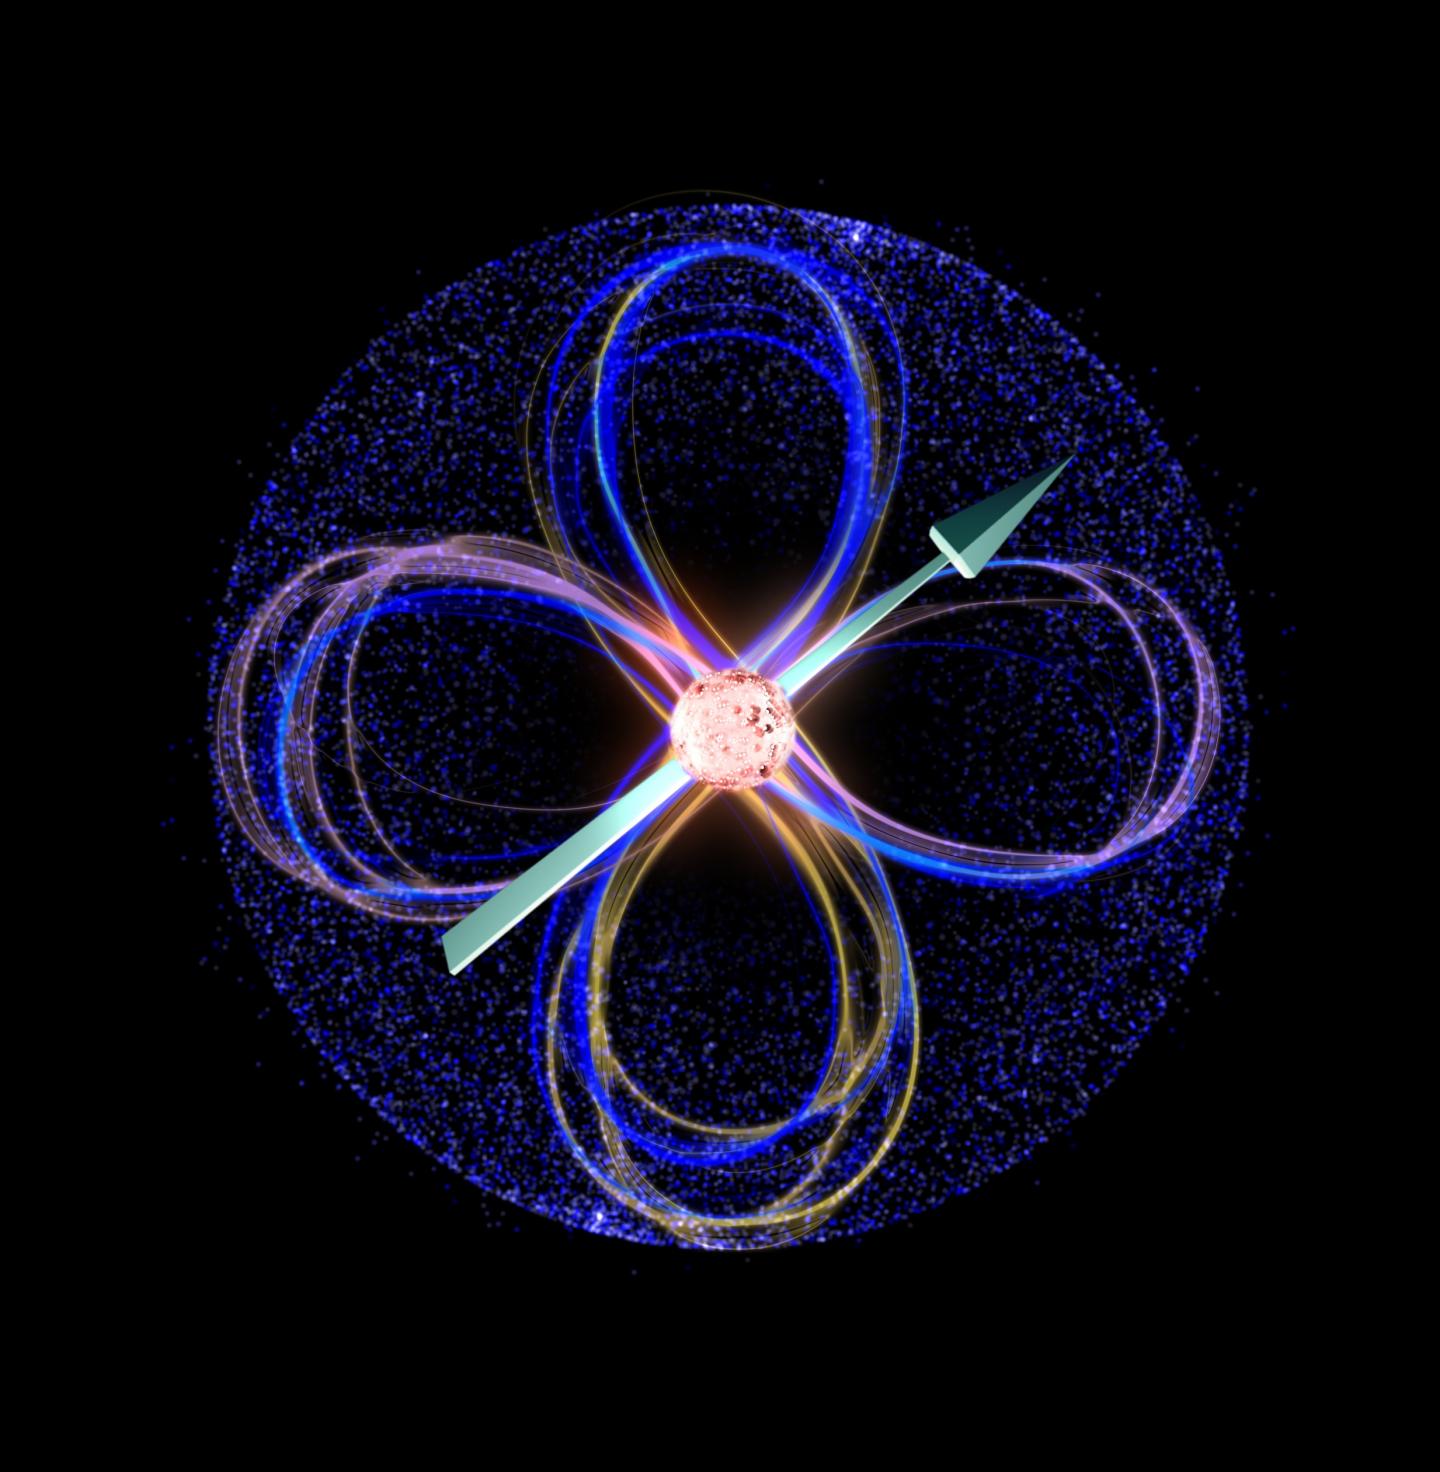 This is an artists impression of spin-orbit coupling of atom qubits